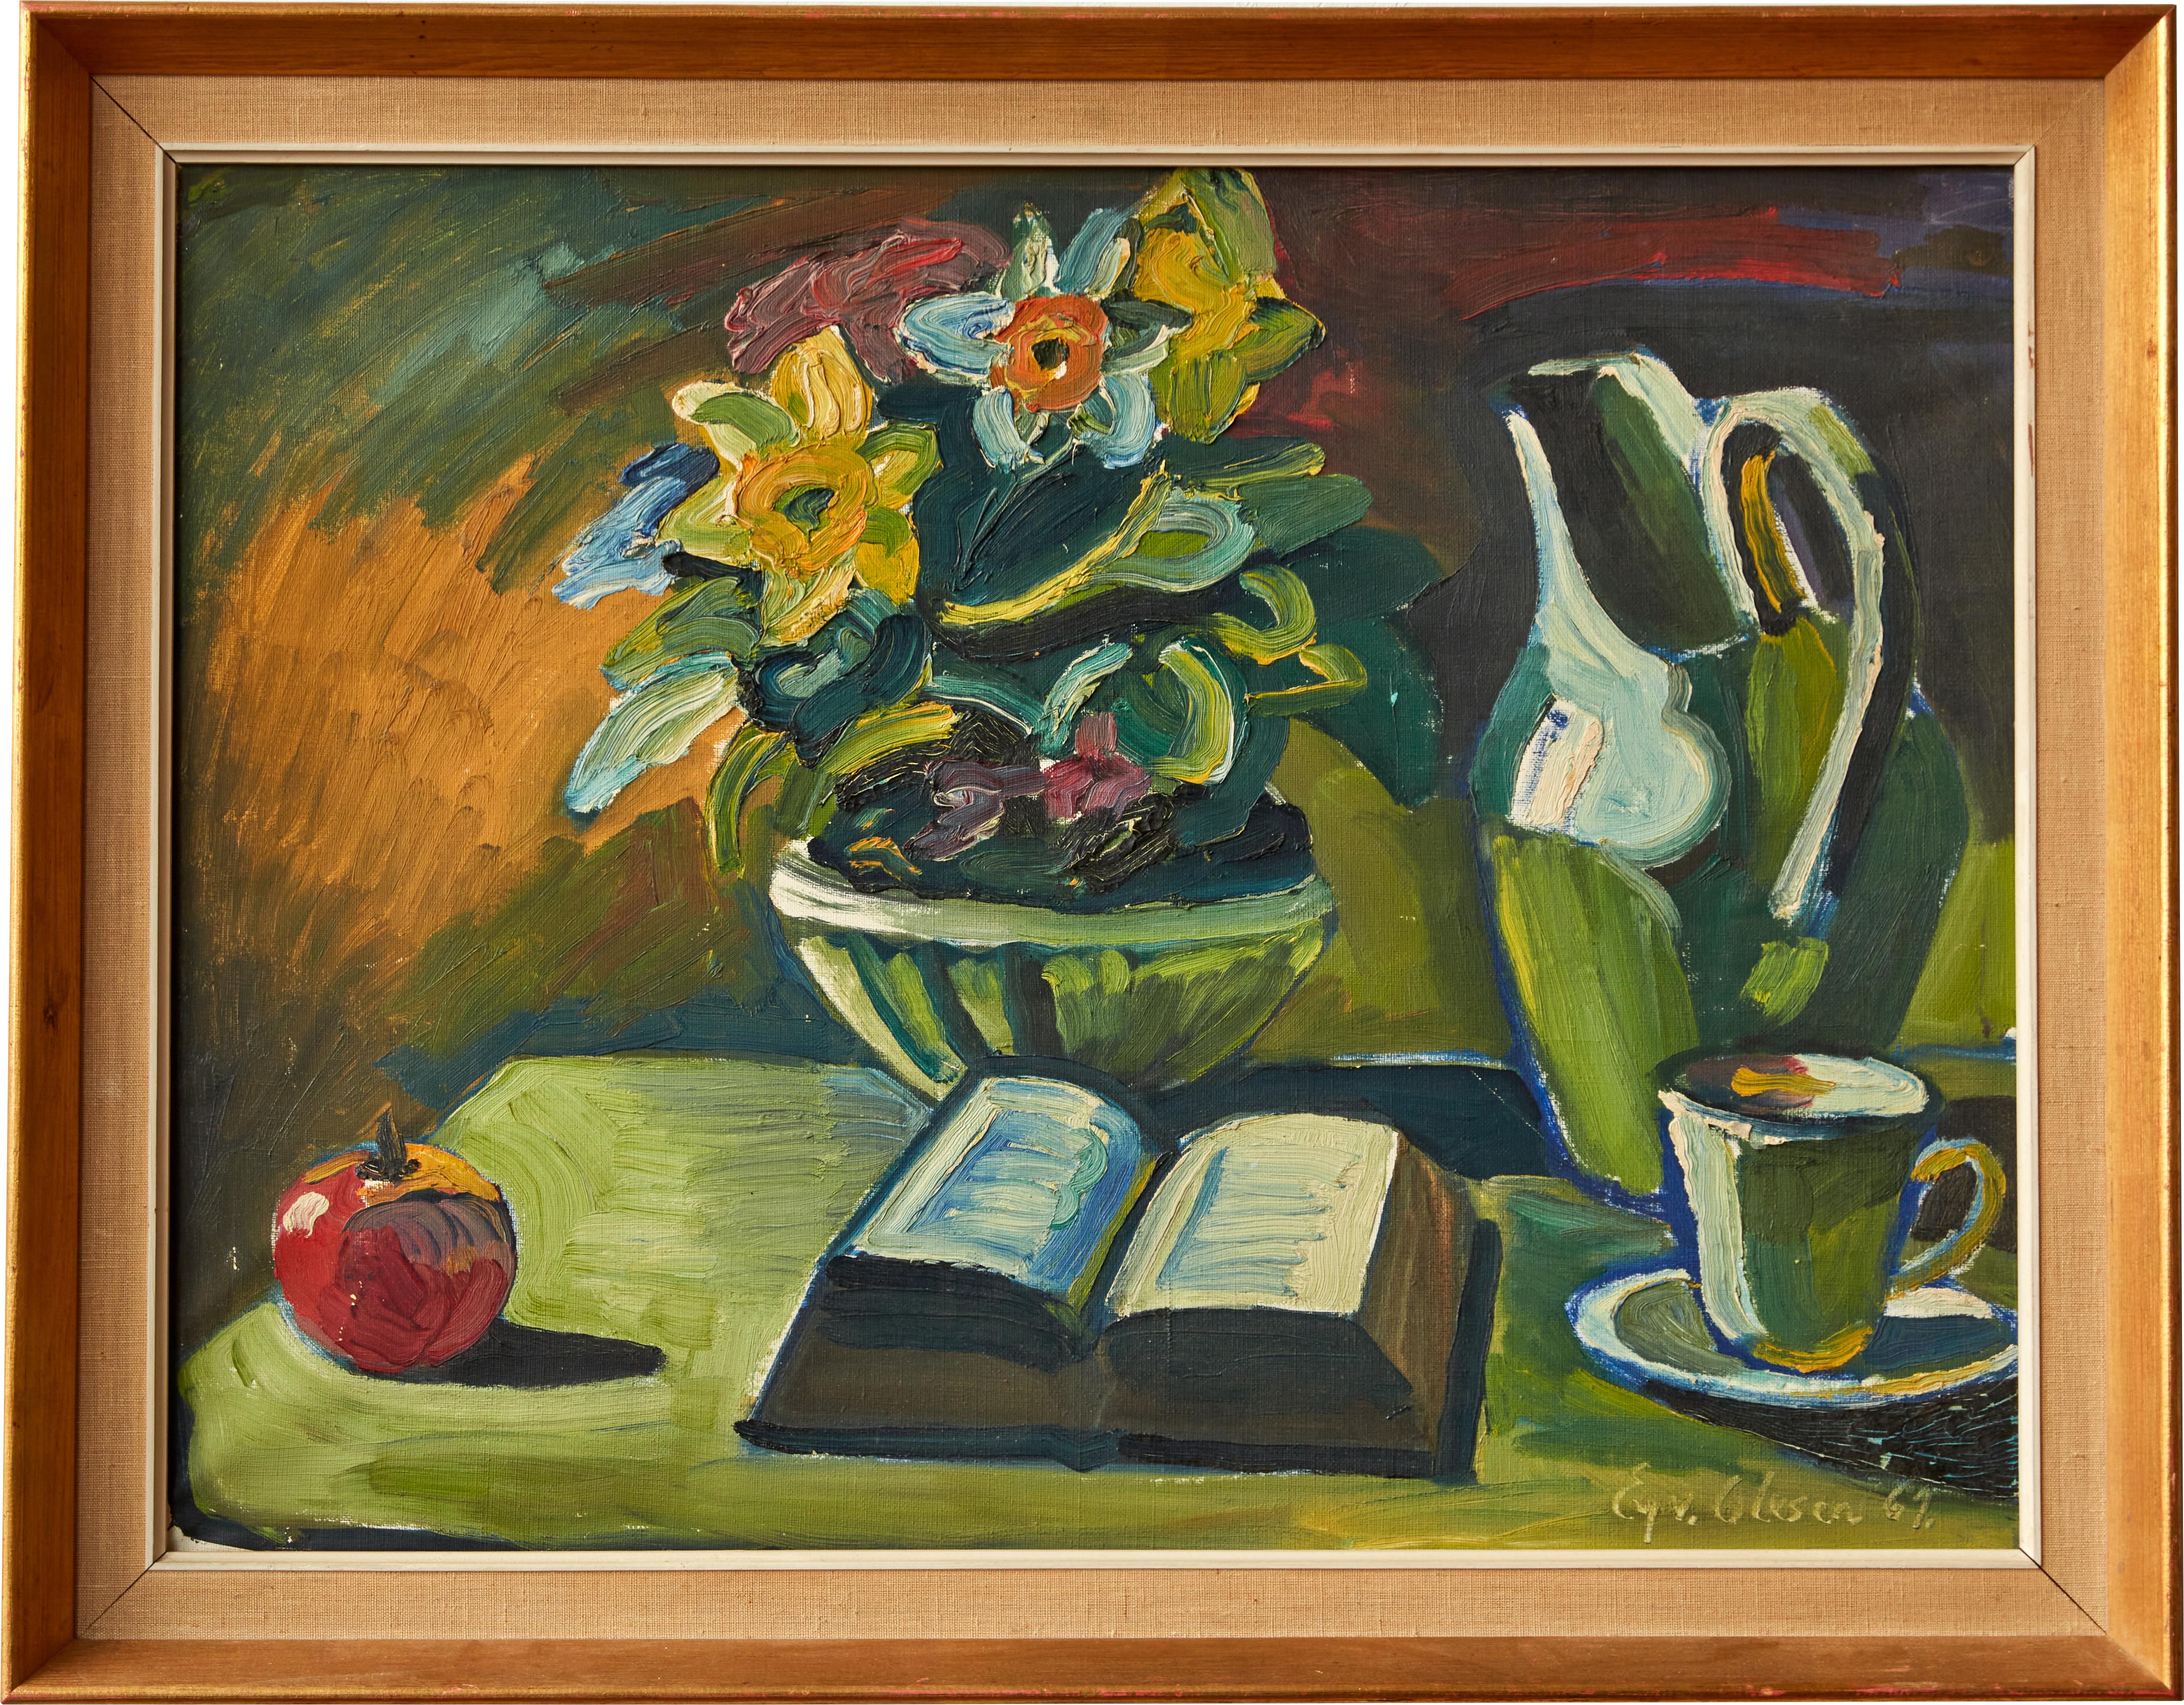 Flowers, Fruit + Book Still Life is a vintage oil on canvas painted in 1967 by Eyvind Oleson. The still life depicts an open book, pitcher, apple and daffodils upon a table. Housed in a contemporary giltwood frame with linen filet. From the estate